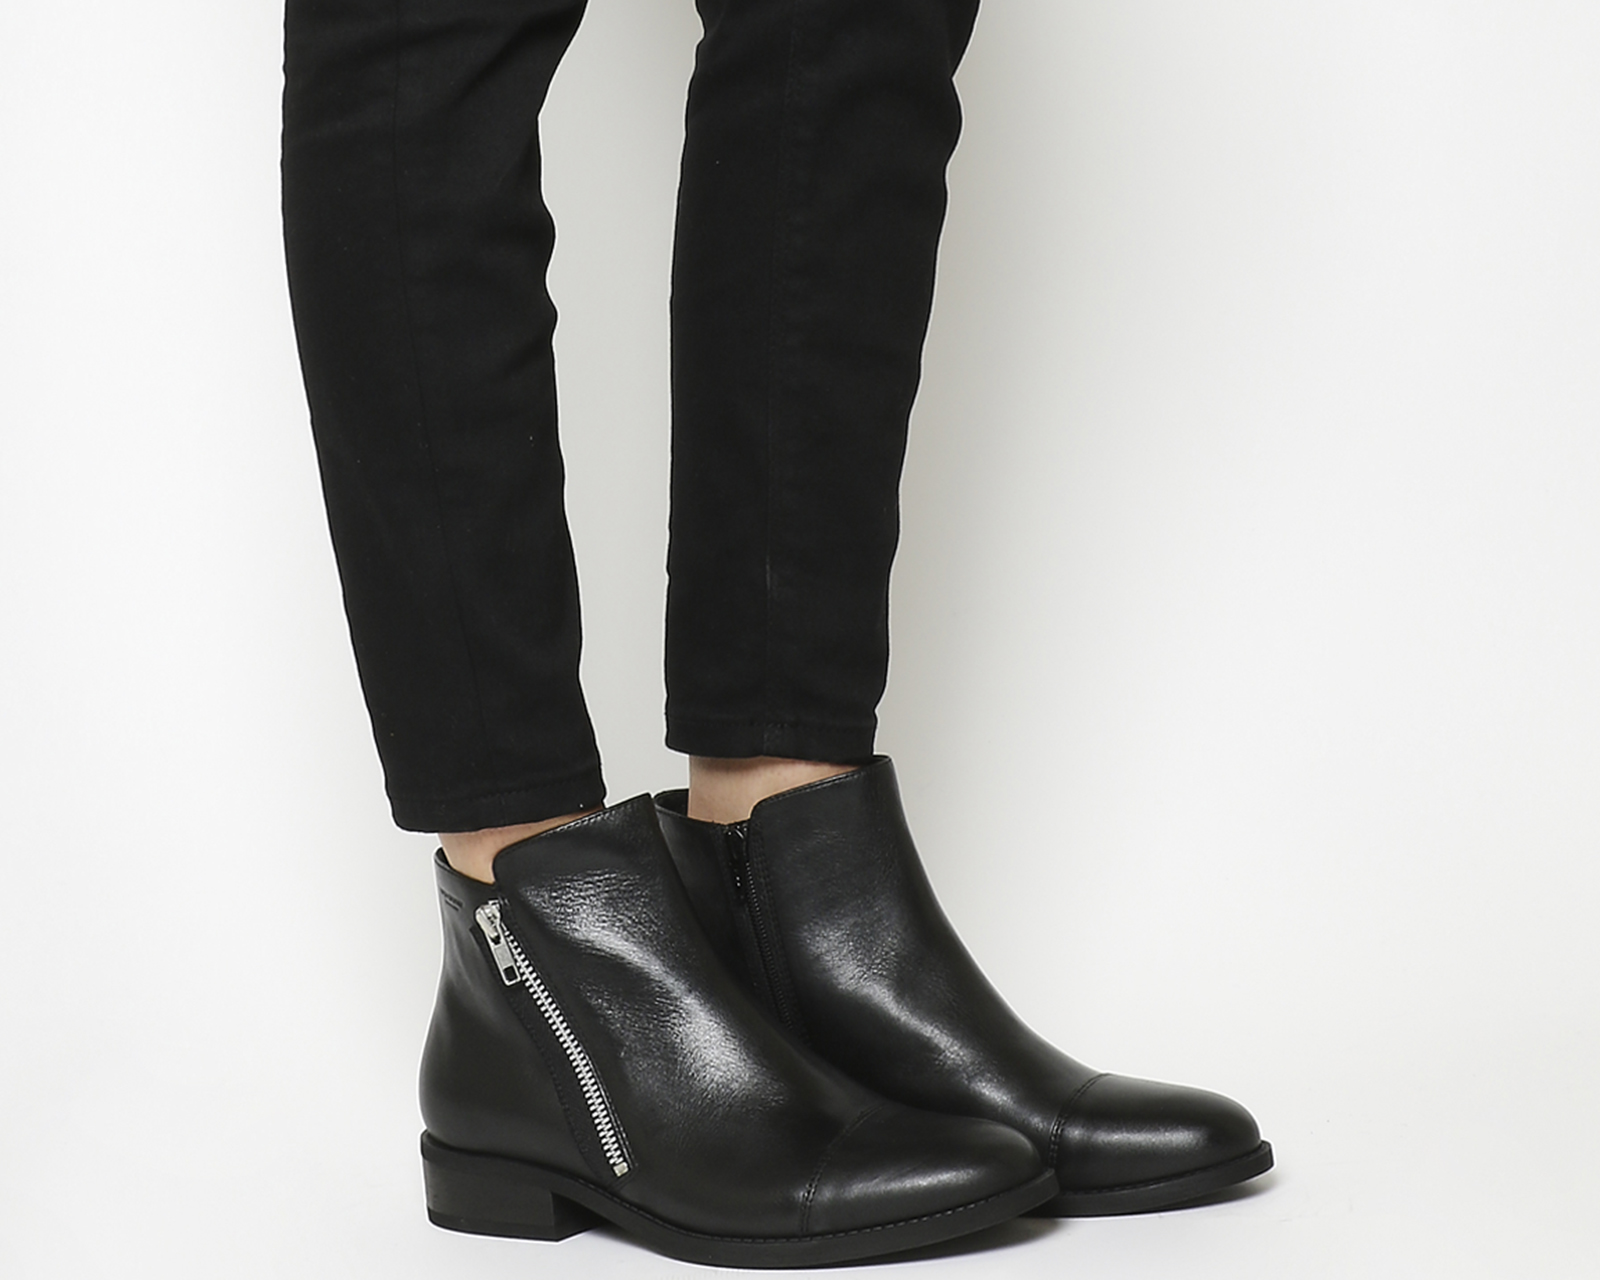 Vagabond Cary Zip Boots Black Leather - Ankle Boots